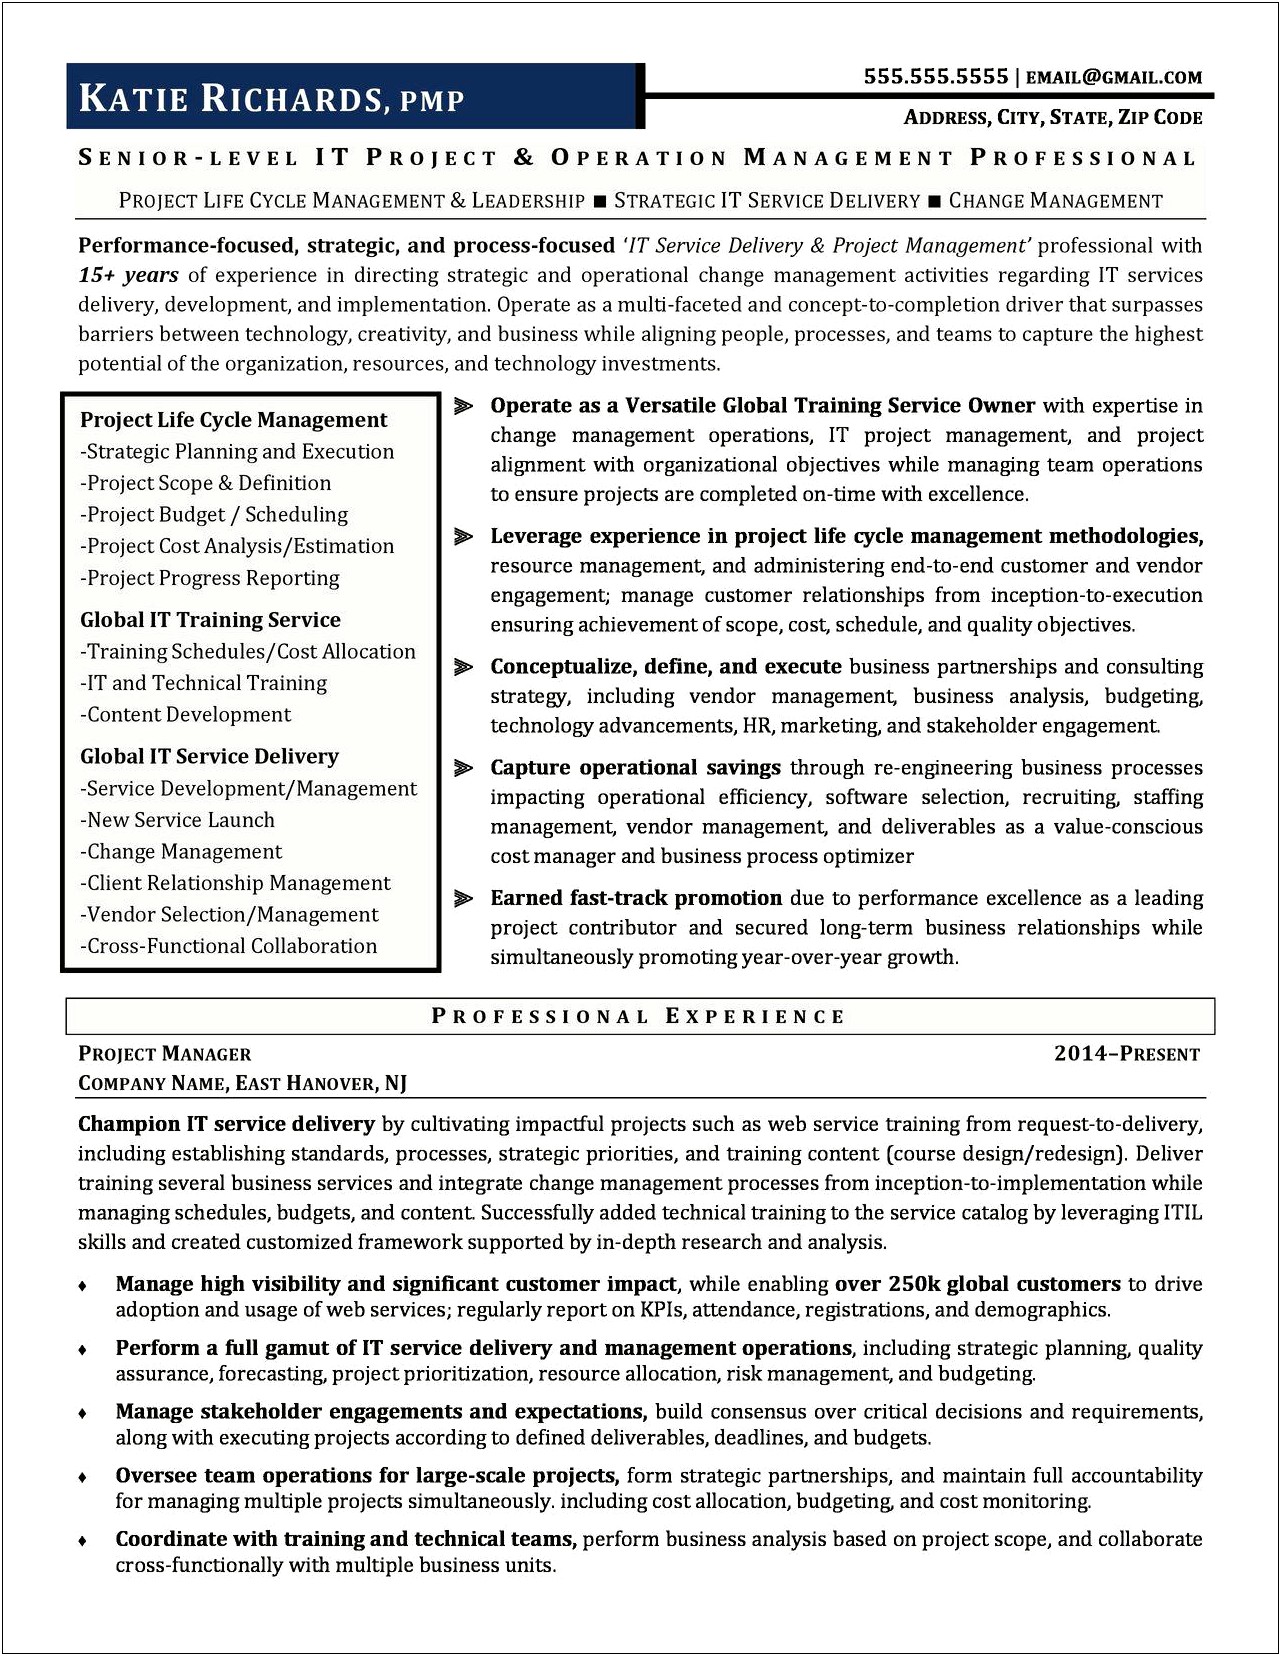 Ivy League Resume Cover Letter Marketing